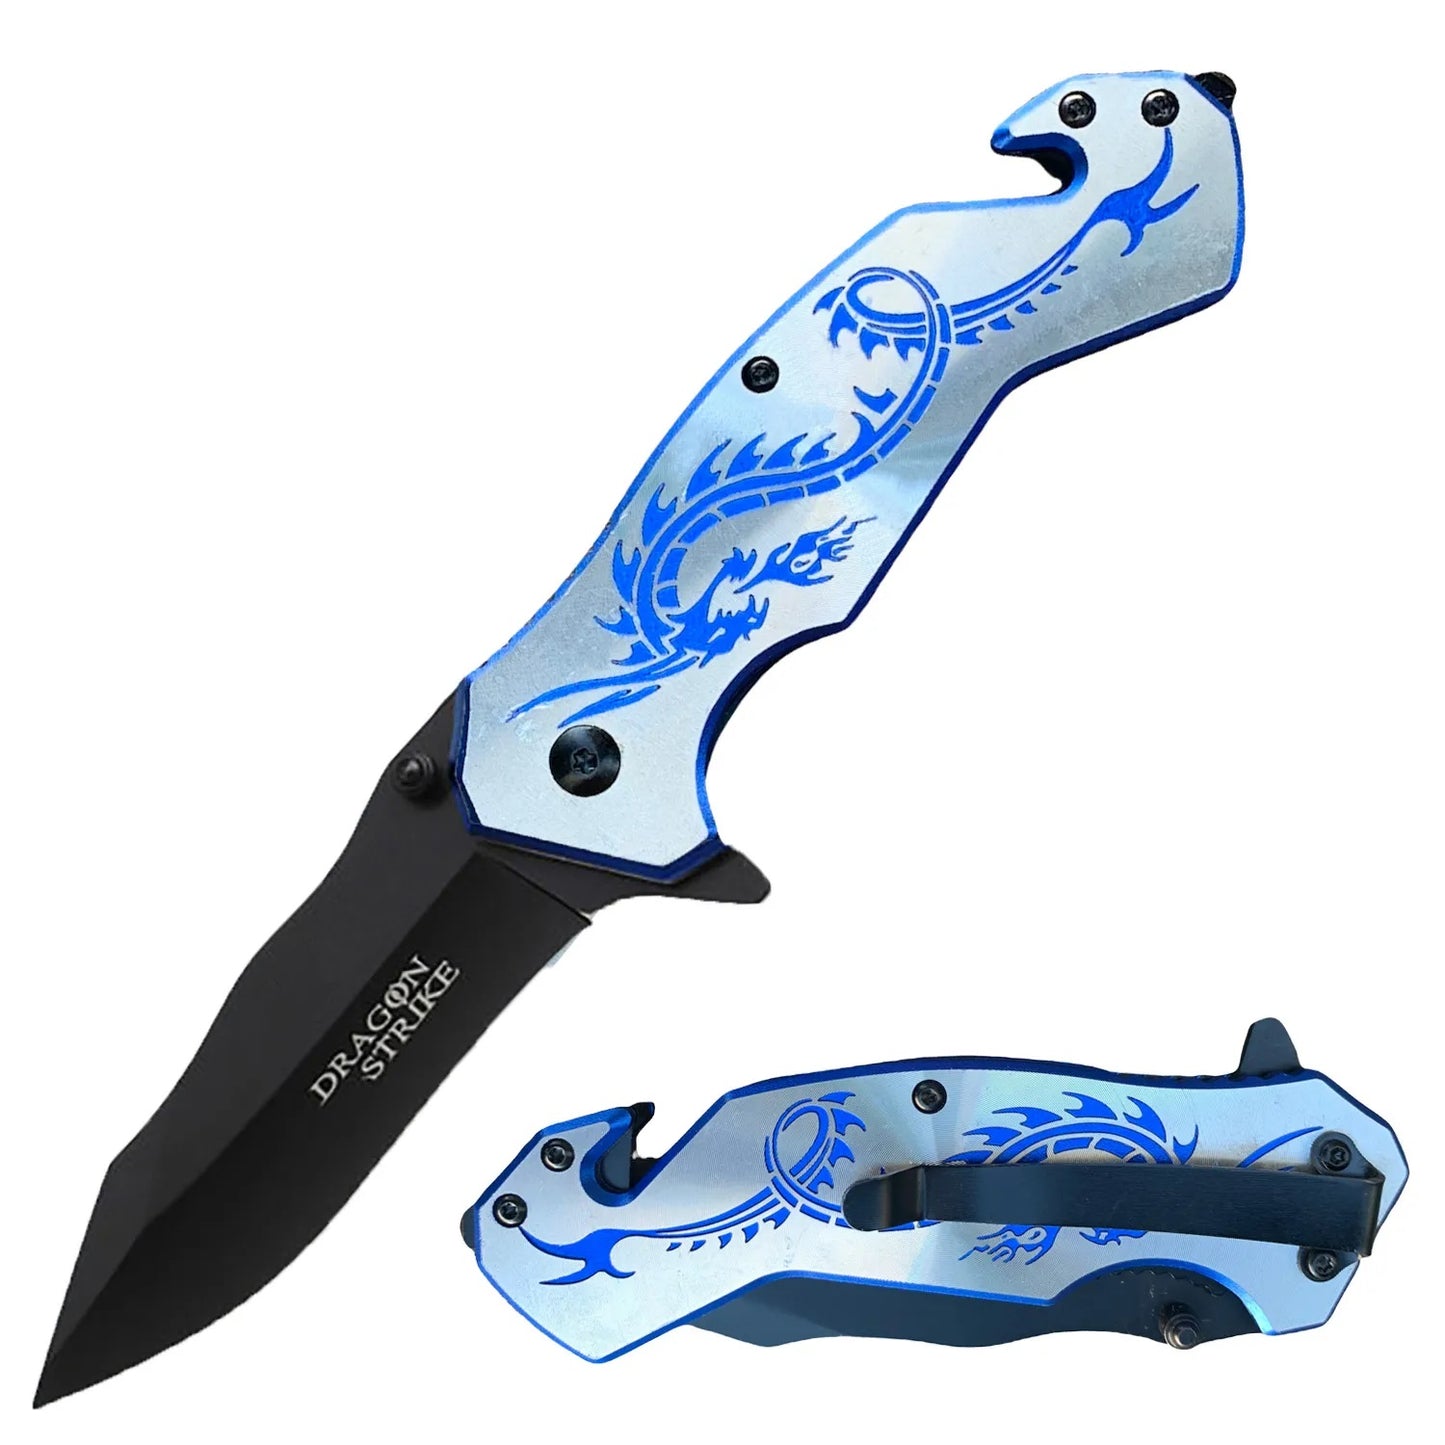 4.75" Closed Spring Assisted Knife (6 Colors)